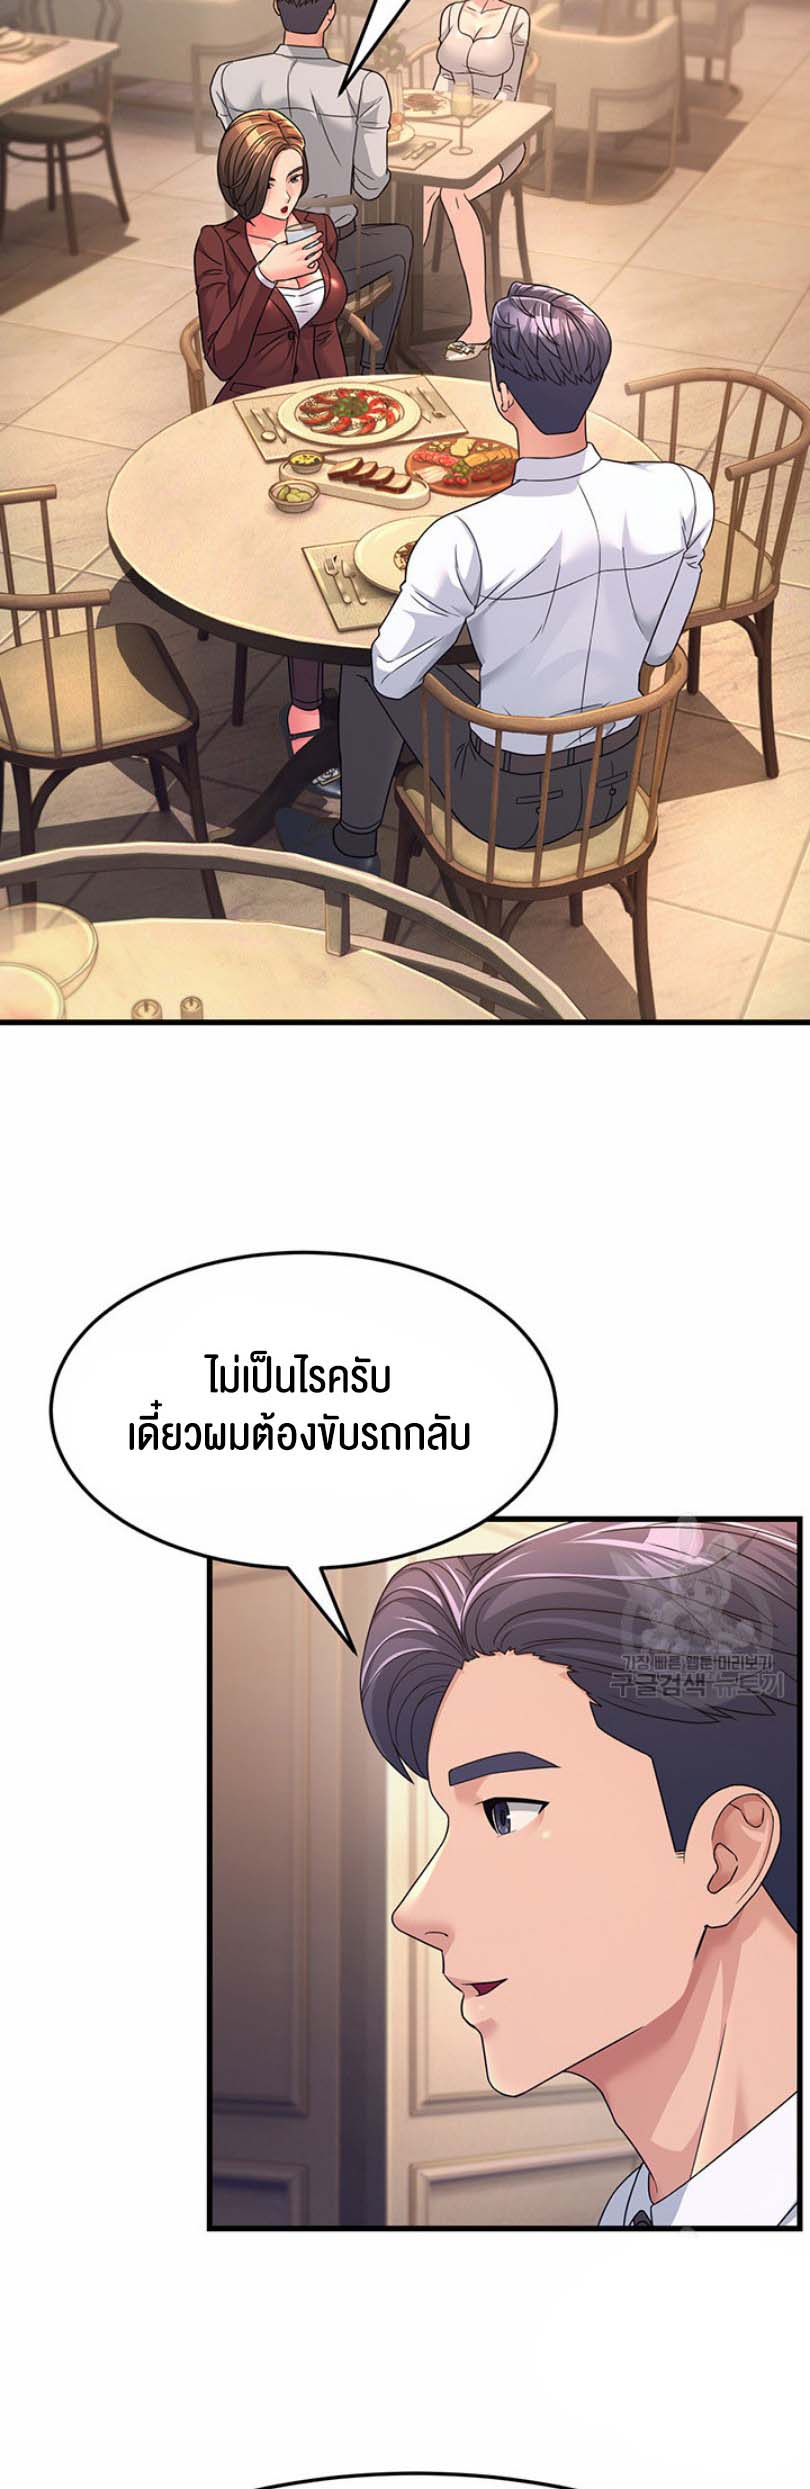 à¸­à¹ˆà¸²à¸™à¹‚à¸”à¸ˆà¸´à¸™ à¹€à¸£à¸·à¹ˆà¸­à¸‡ Mother in Law Bends To My Will 9 11